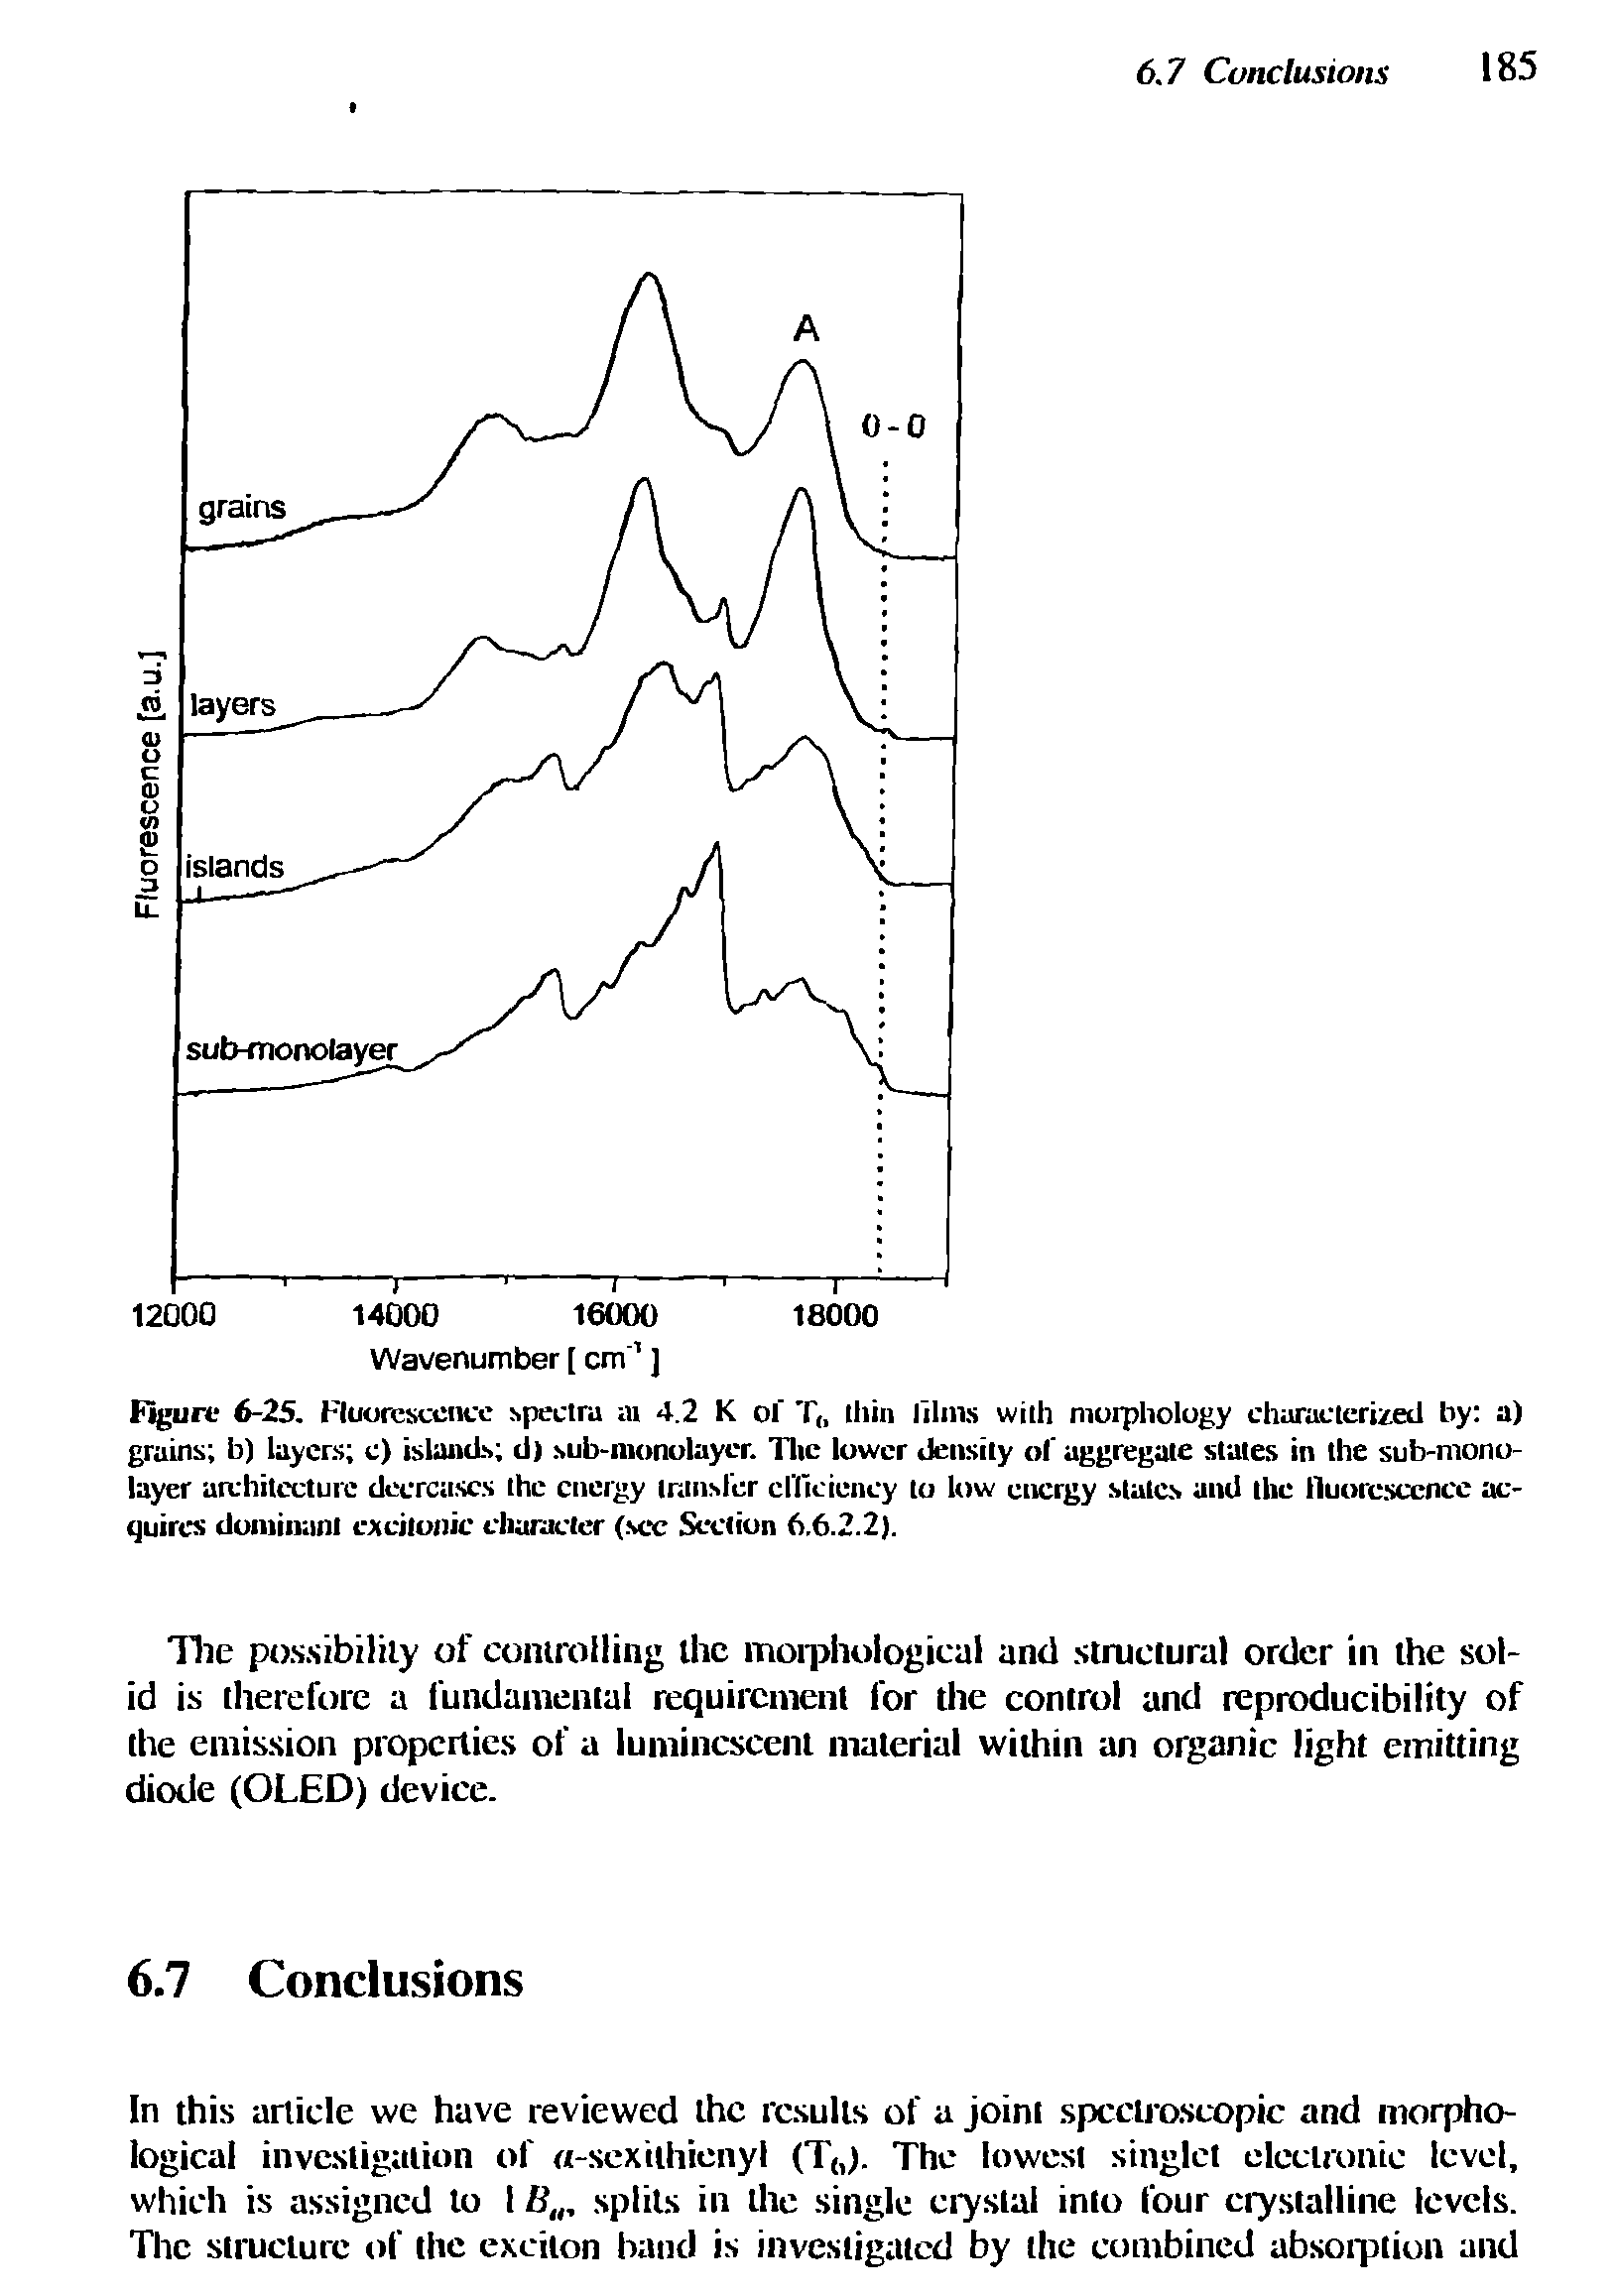 Figure 6-25. Fluorescence spectra at 4.2 K of T,. thin lilms with morphology characterized by a) grains b) layers c) islands d) sub-monolayer. The lower density ol aggregate states in the sub-monolayer architecture decreases the energy transfer efficiency to low energy stales and the fluorescence acquires dominant excitonie character (sec Section 6.6.2.2J.